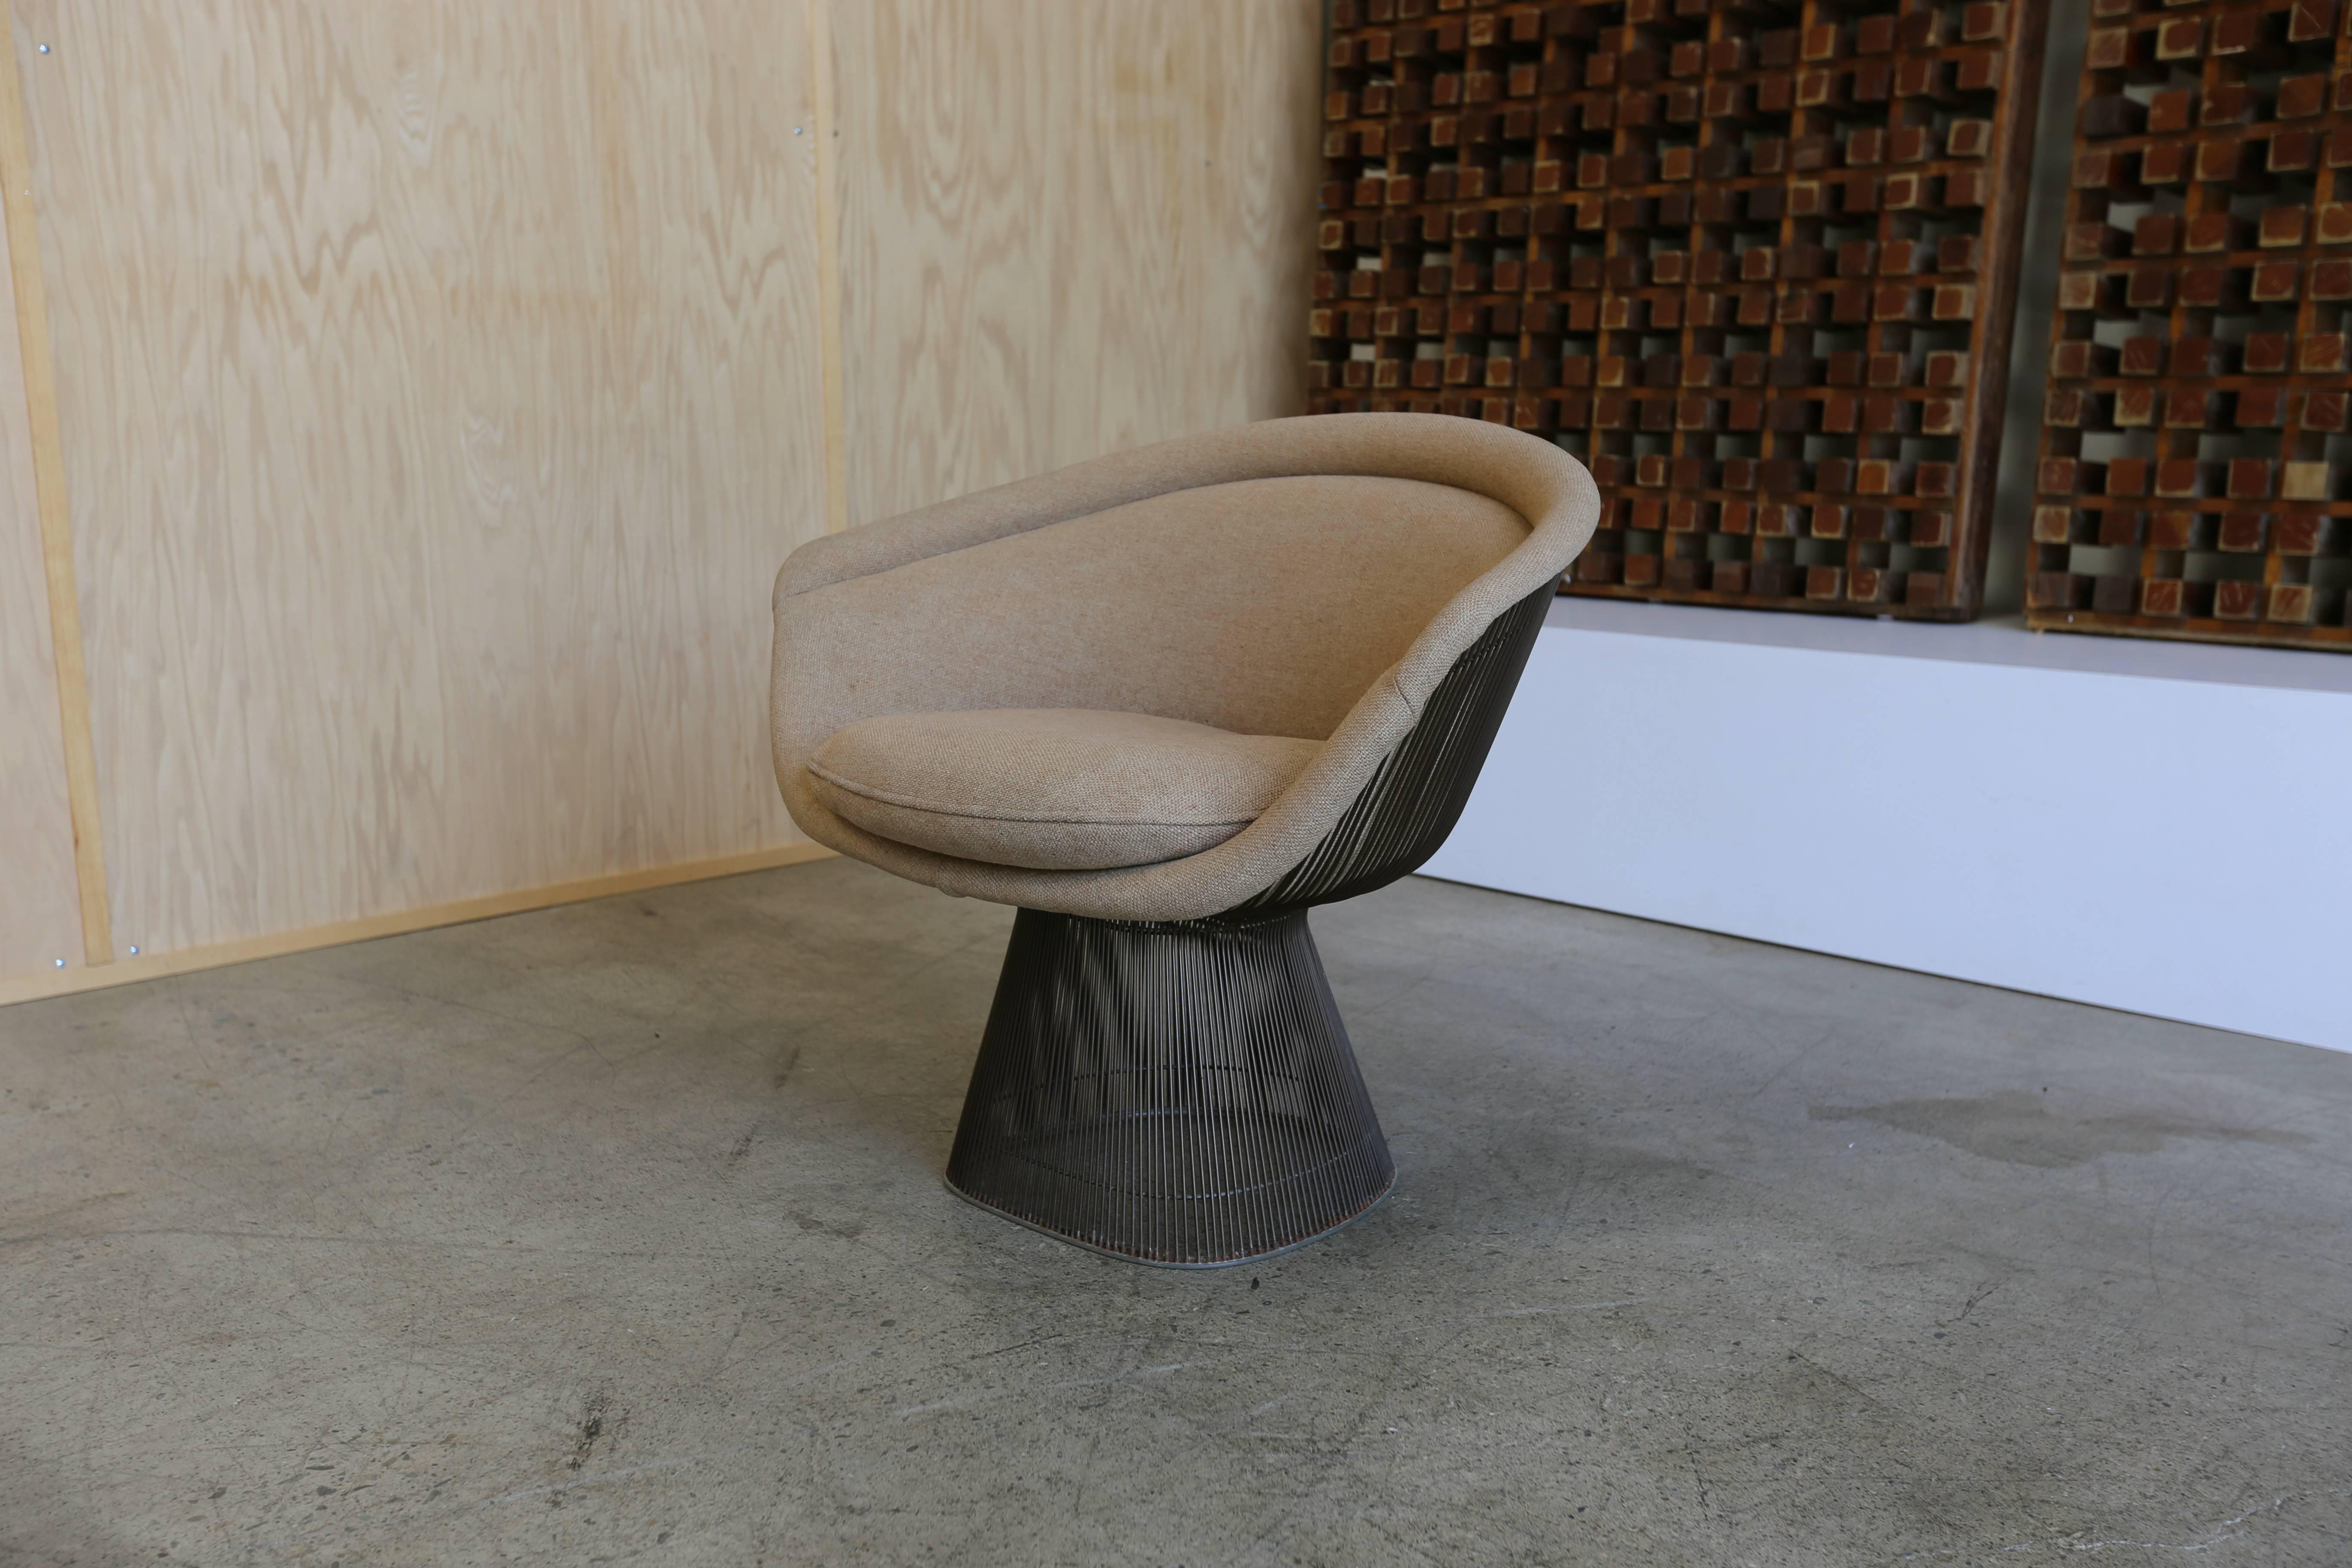 Bronze lounge chair by Warren Platner for Knoll. Bronze finished steel with a fully upholstered back.